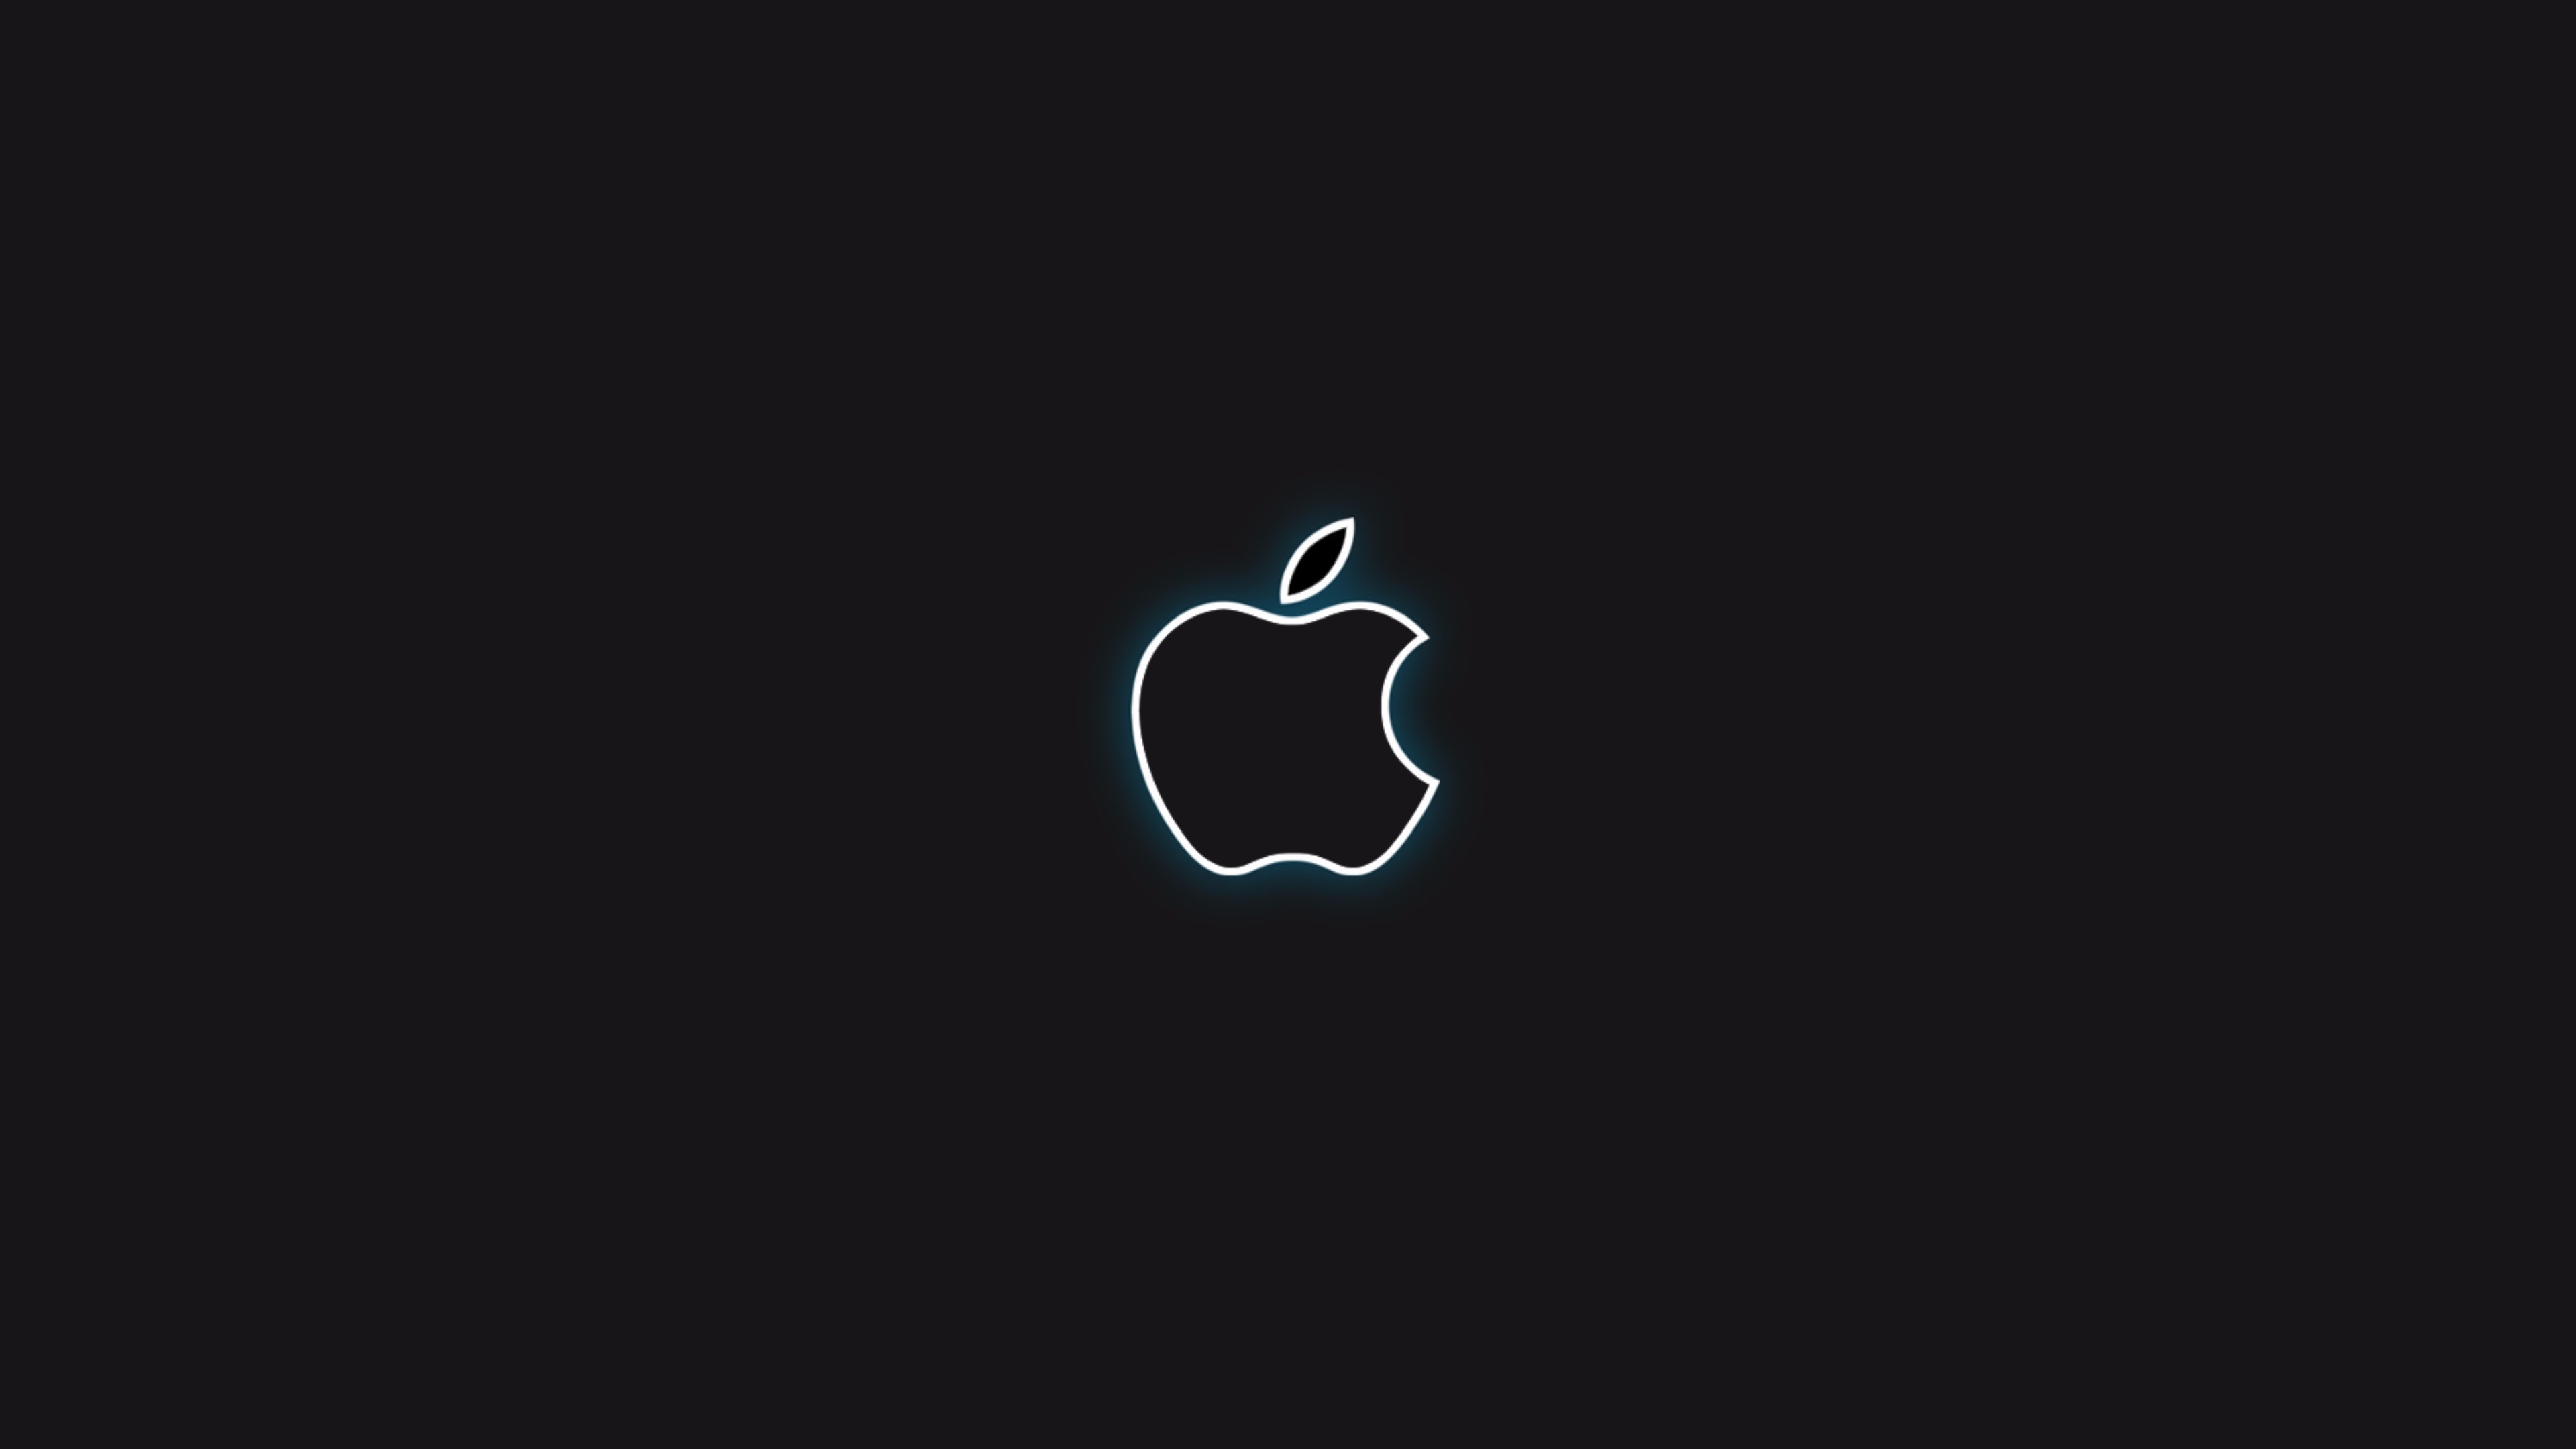 Black and White Apple Wallpaper (72+ pictures)